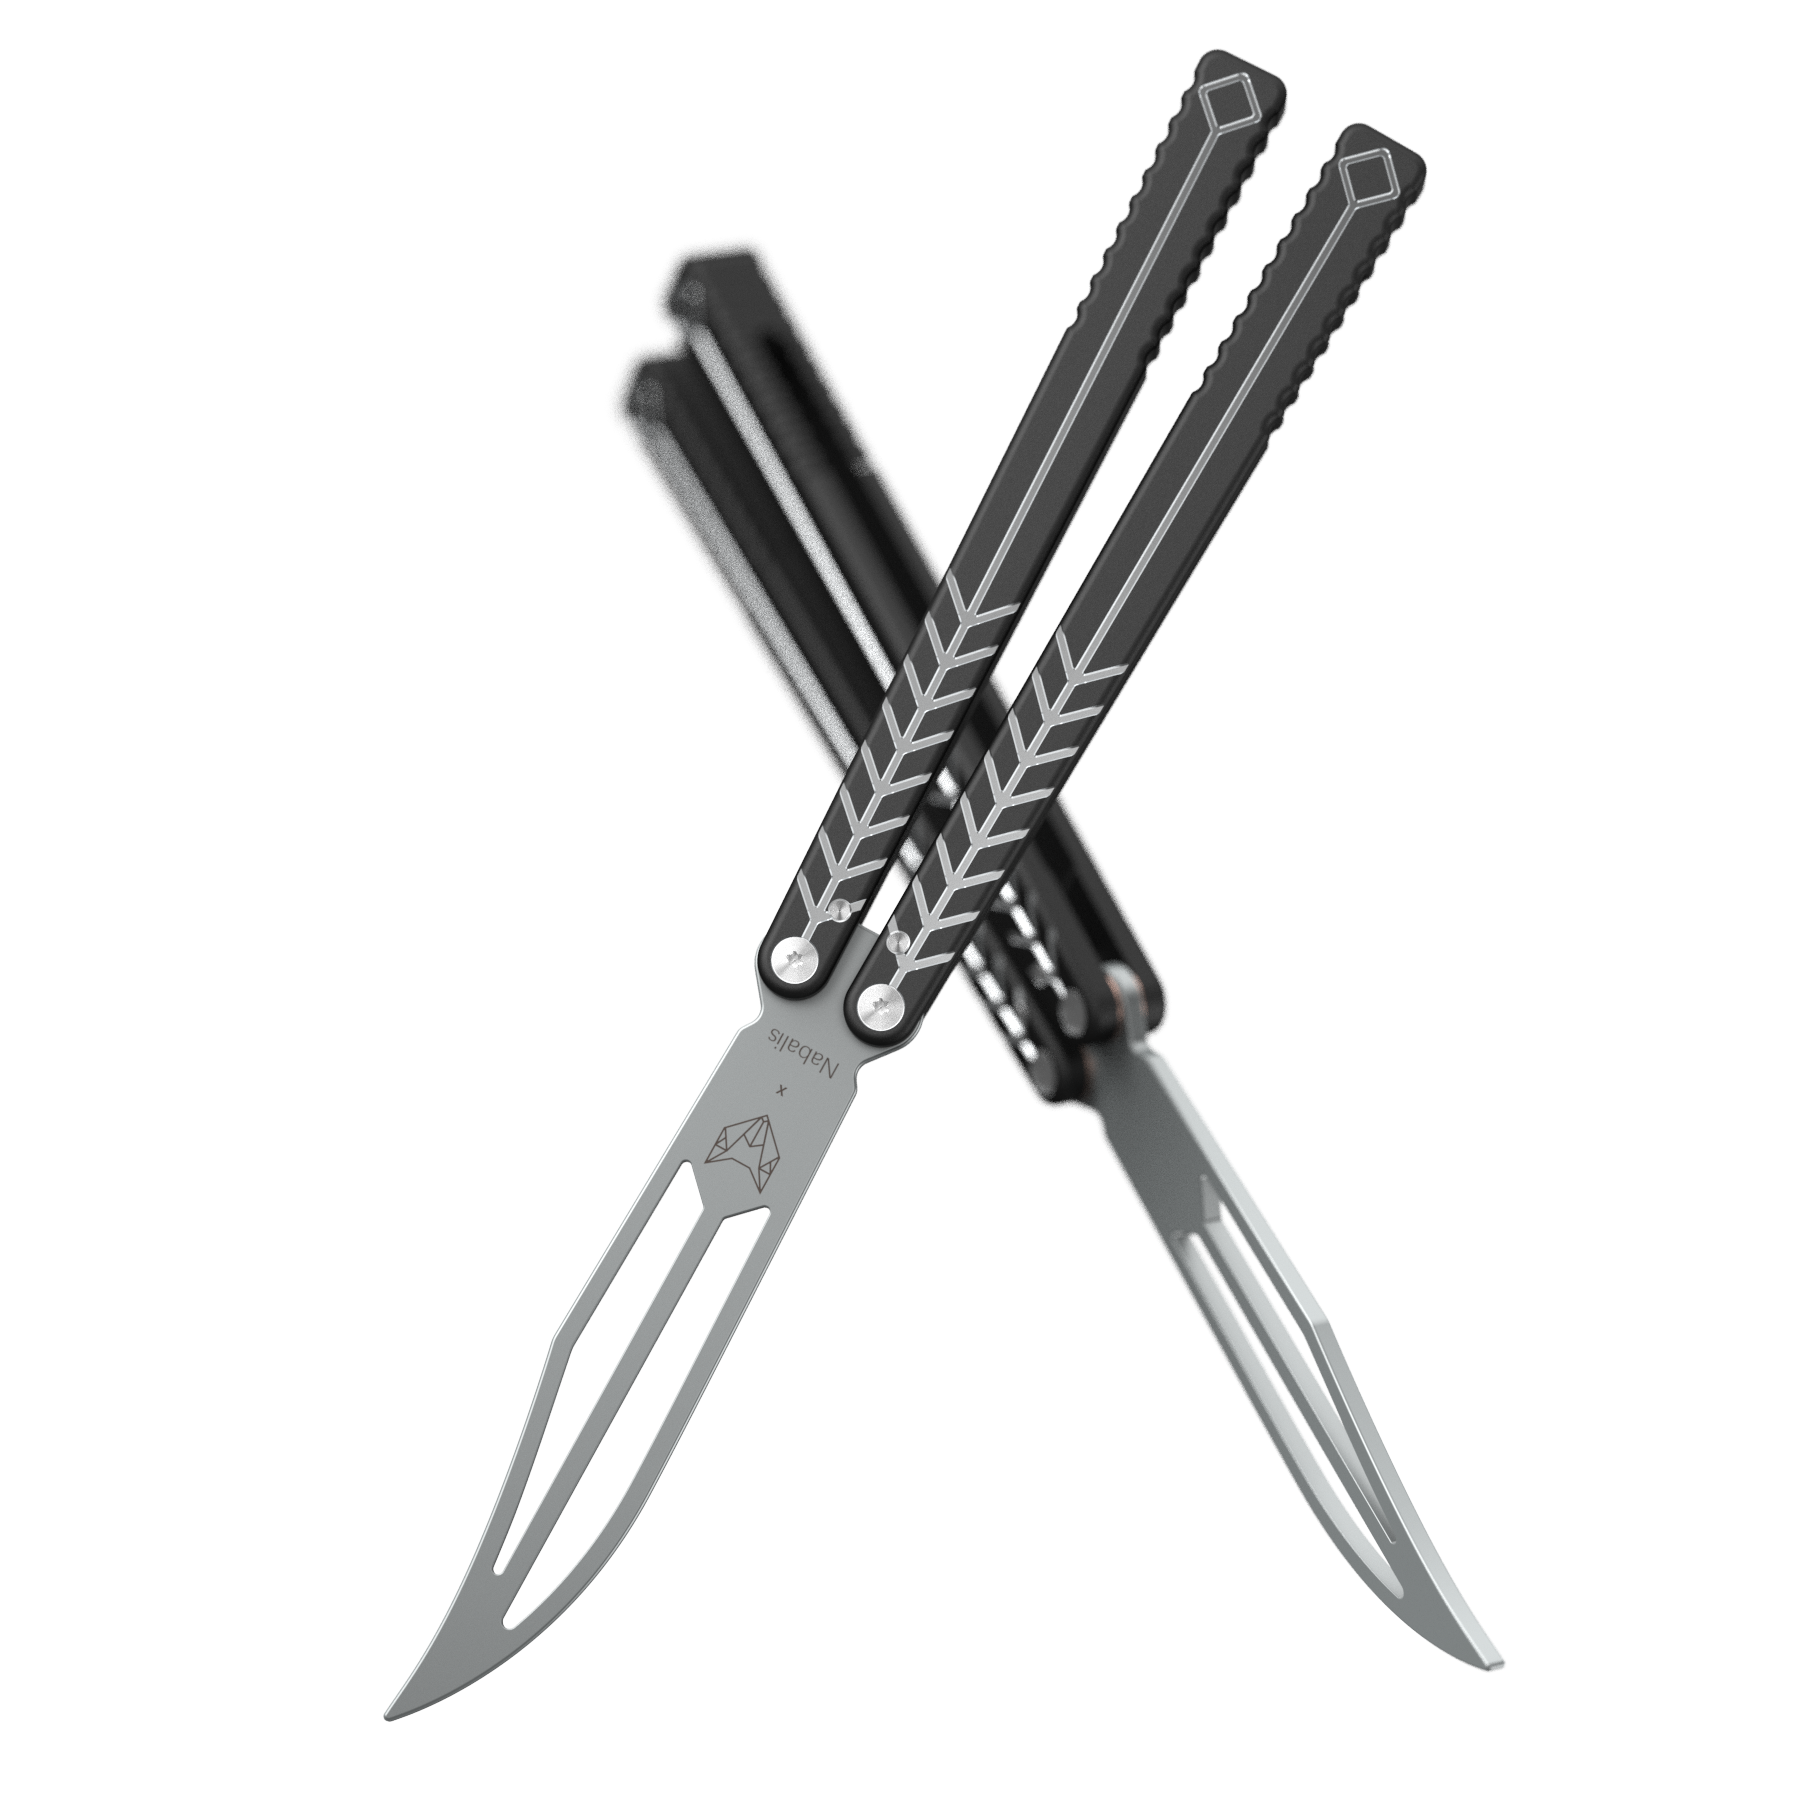 Discounted Butterfly Knife – Nabalis